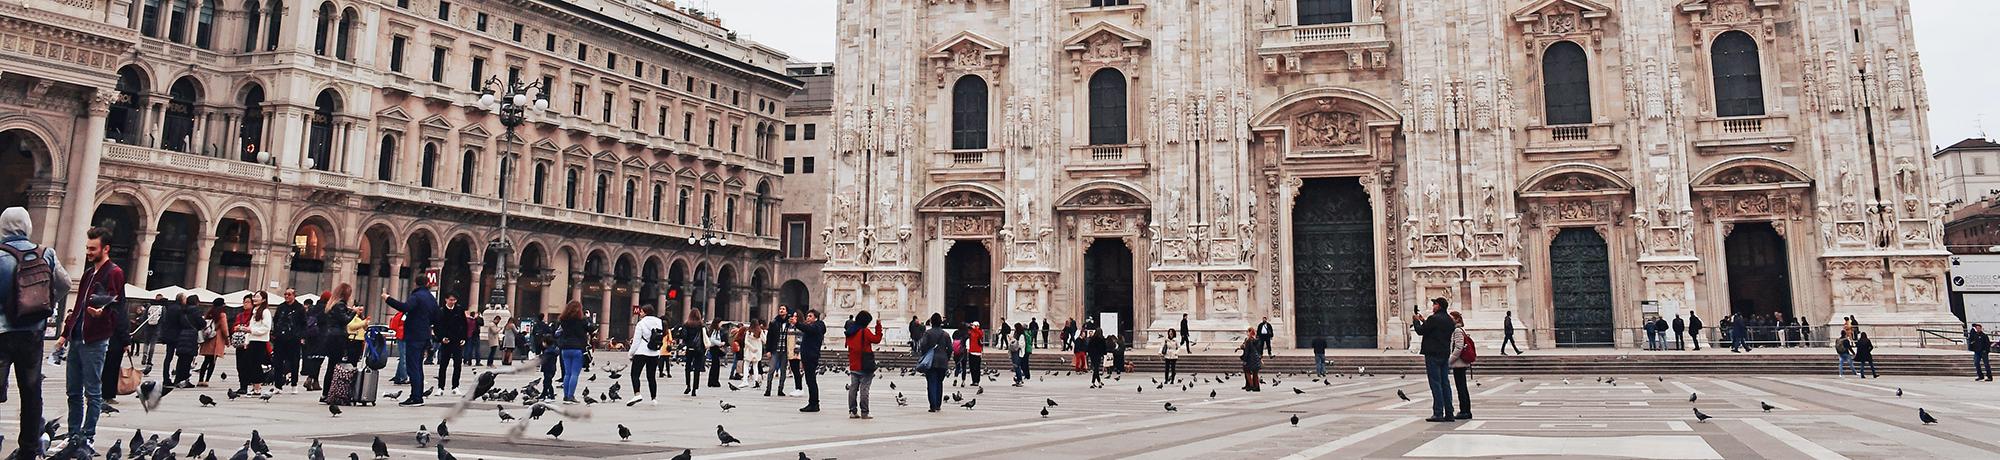 Photo of a plaza in Italy. There are people walking around taking pictures. Old buildings surround the plaza.